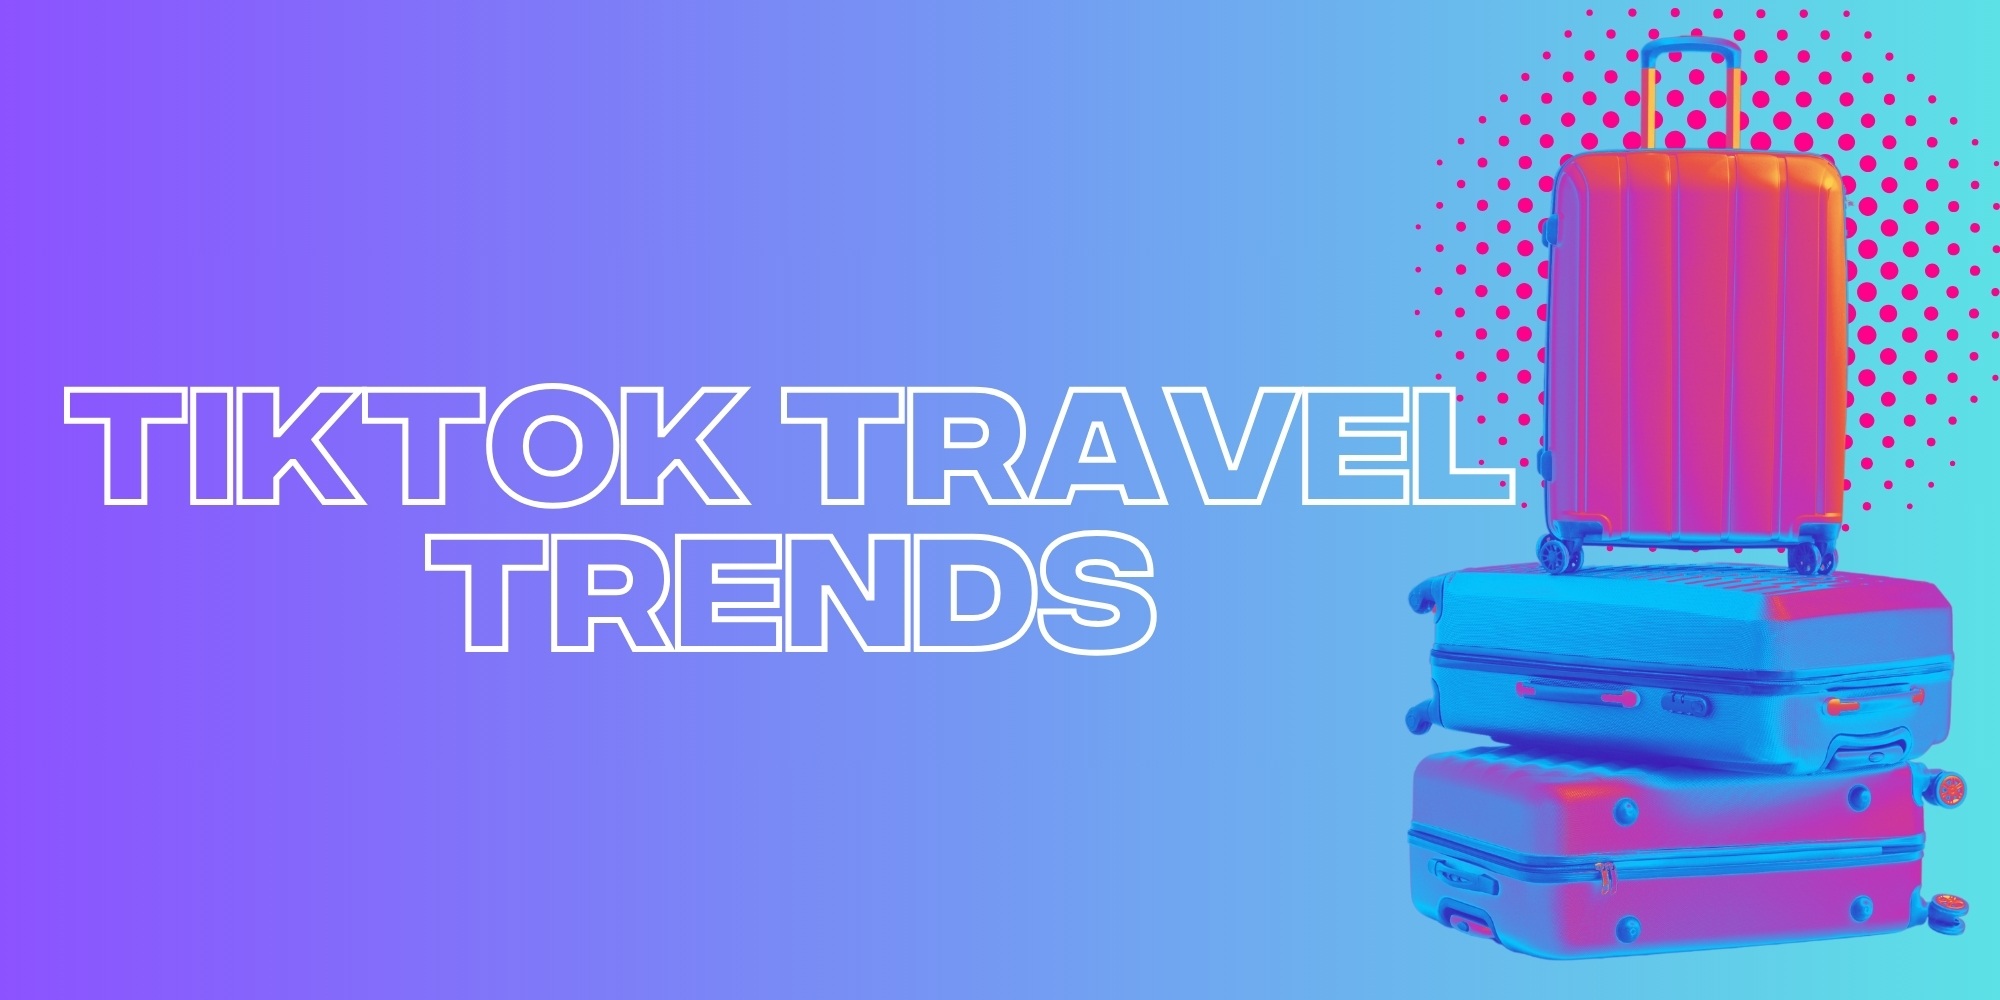 Your Flight With TikTok Airlines is Boarding: Destination Everywhere